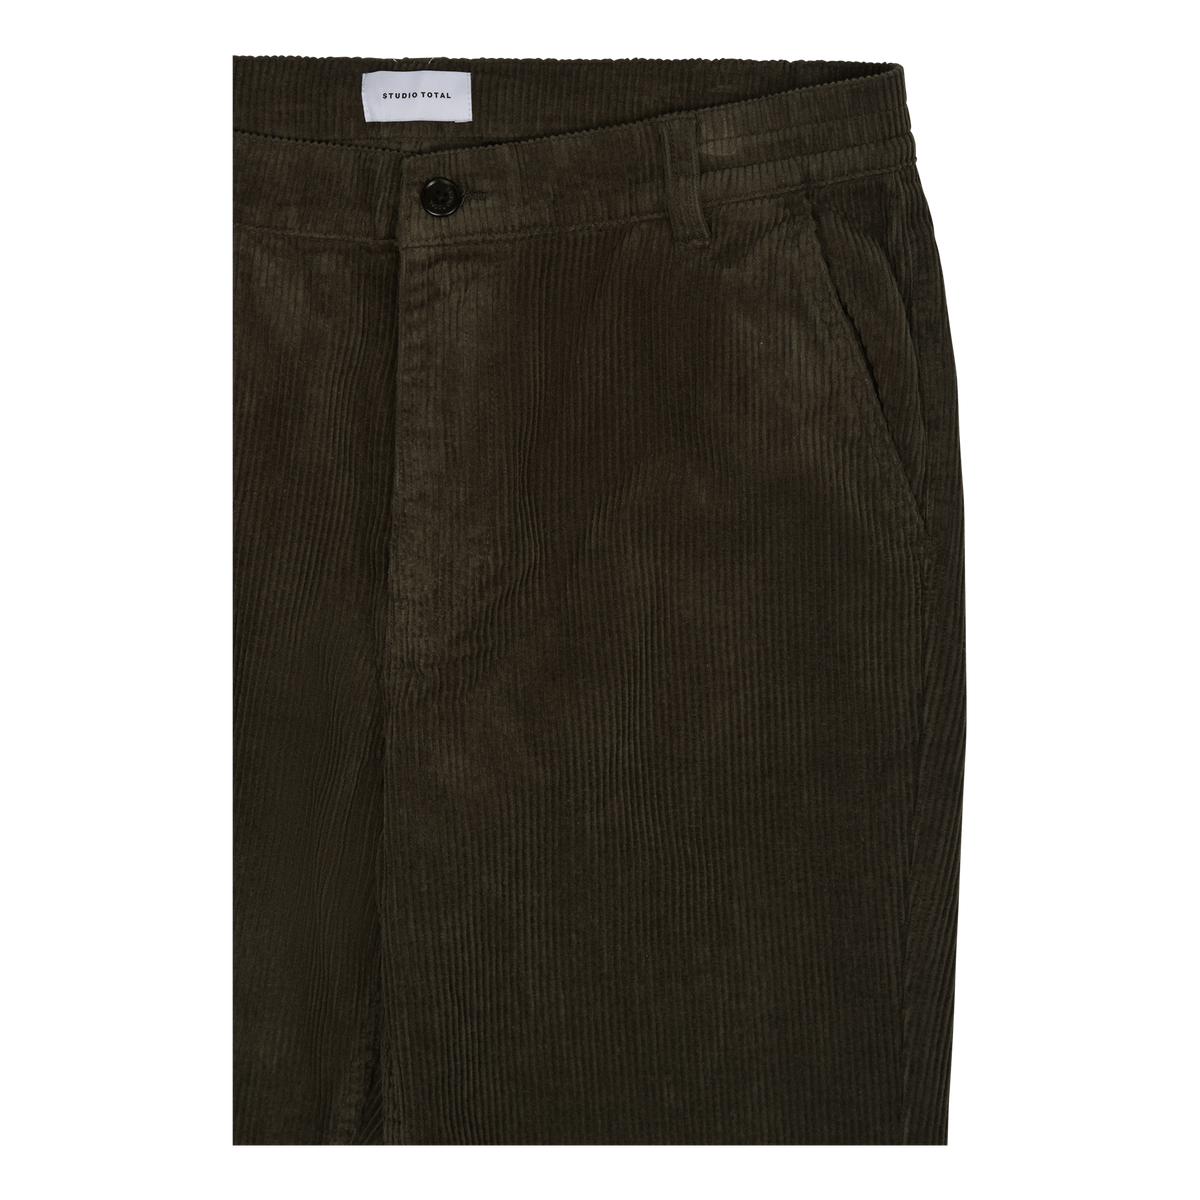 Studio Total Tapered Cord Trouser